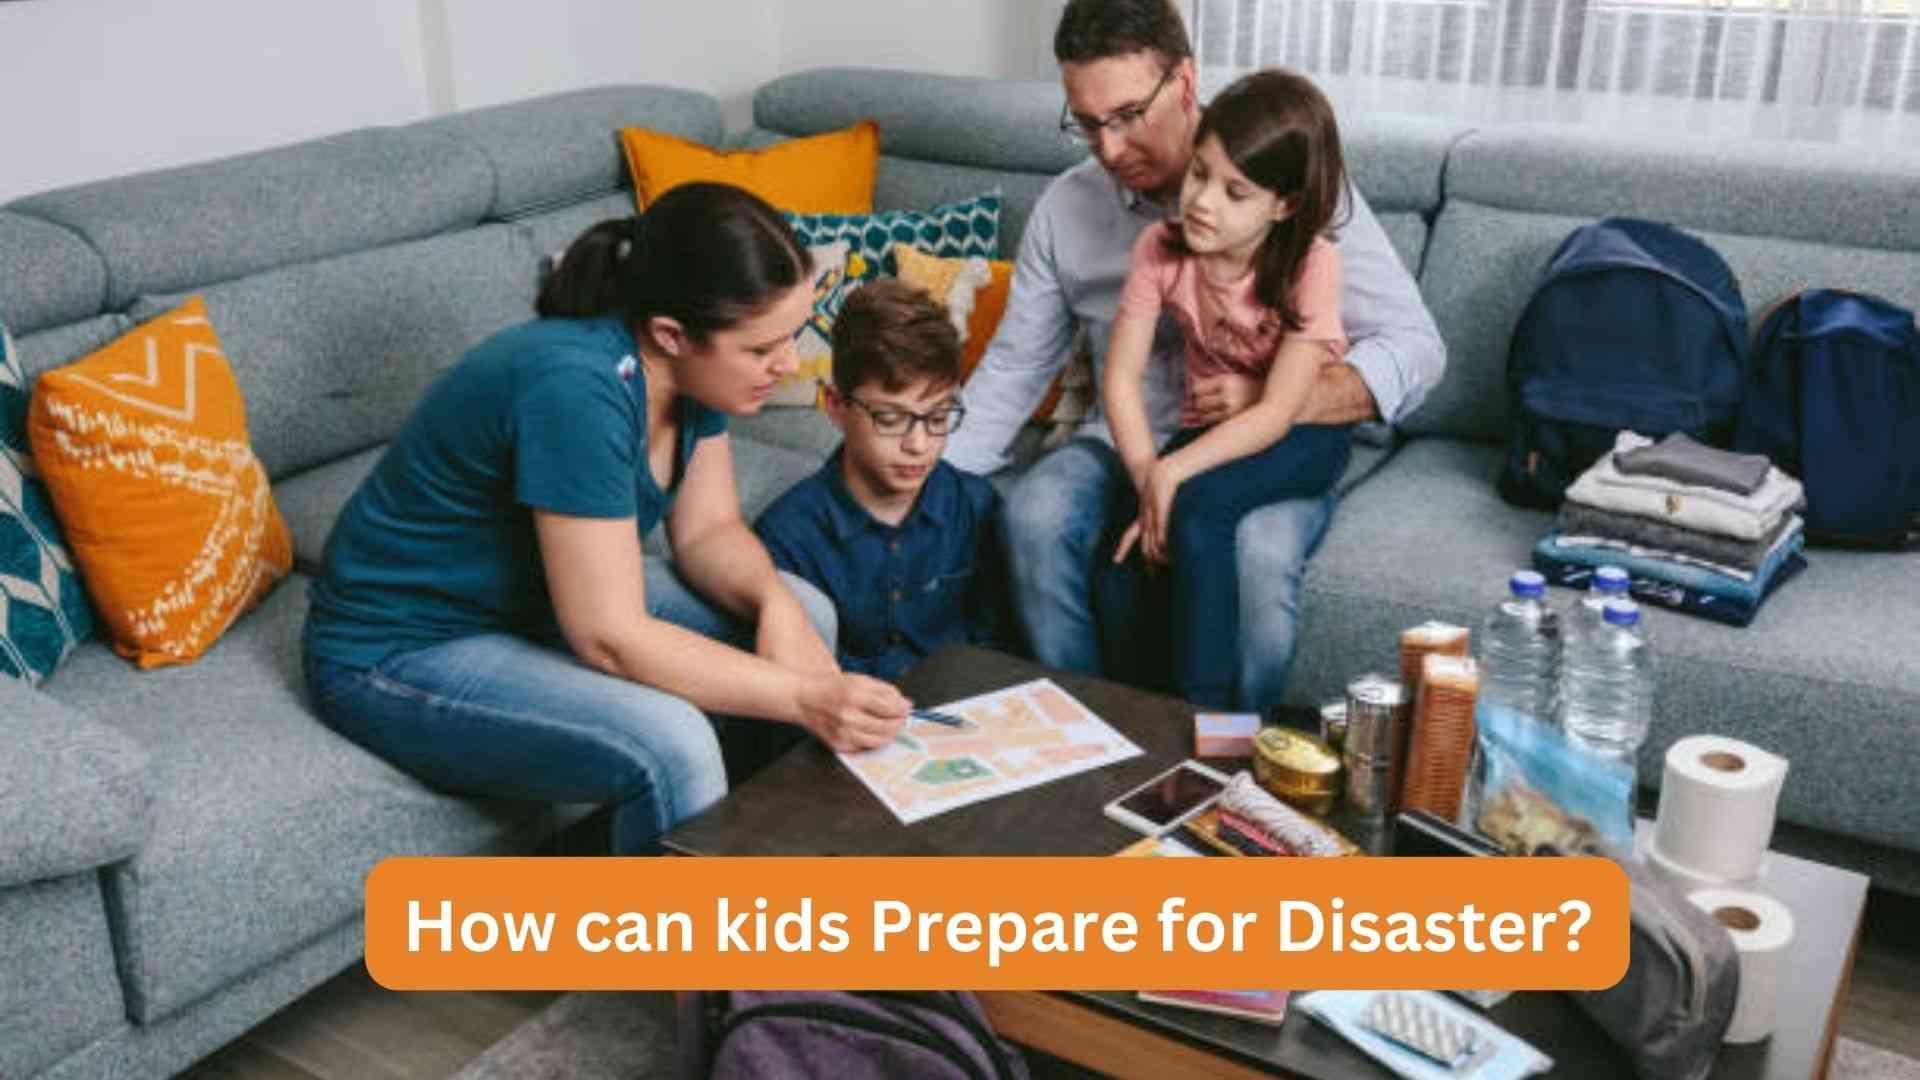 How can kids Prepare for disasters?